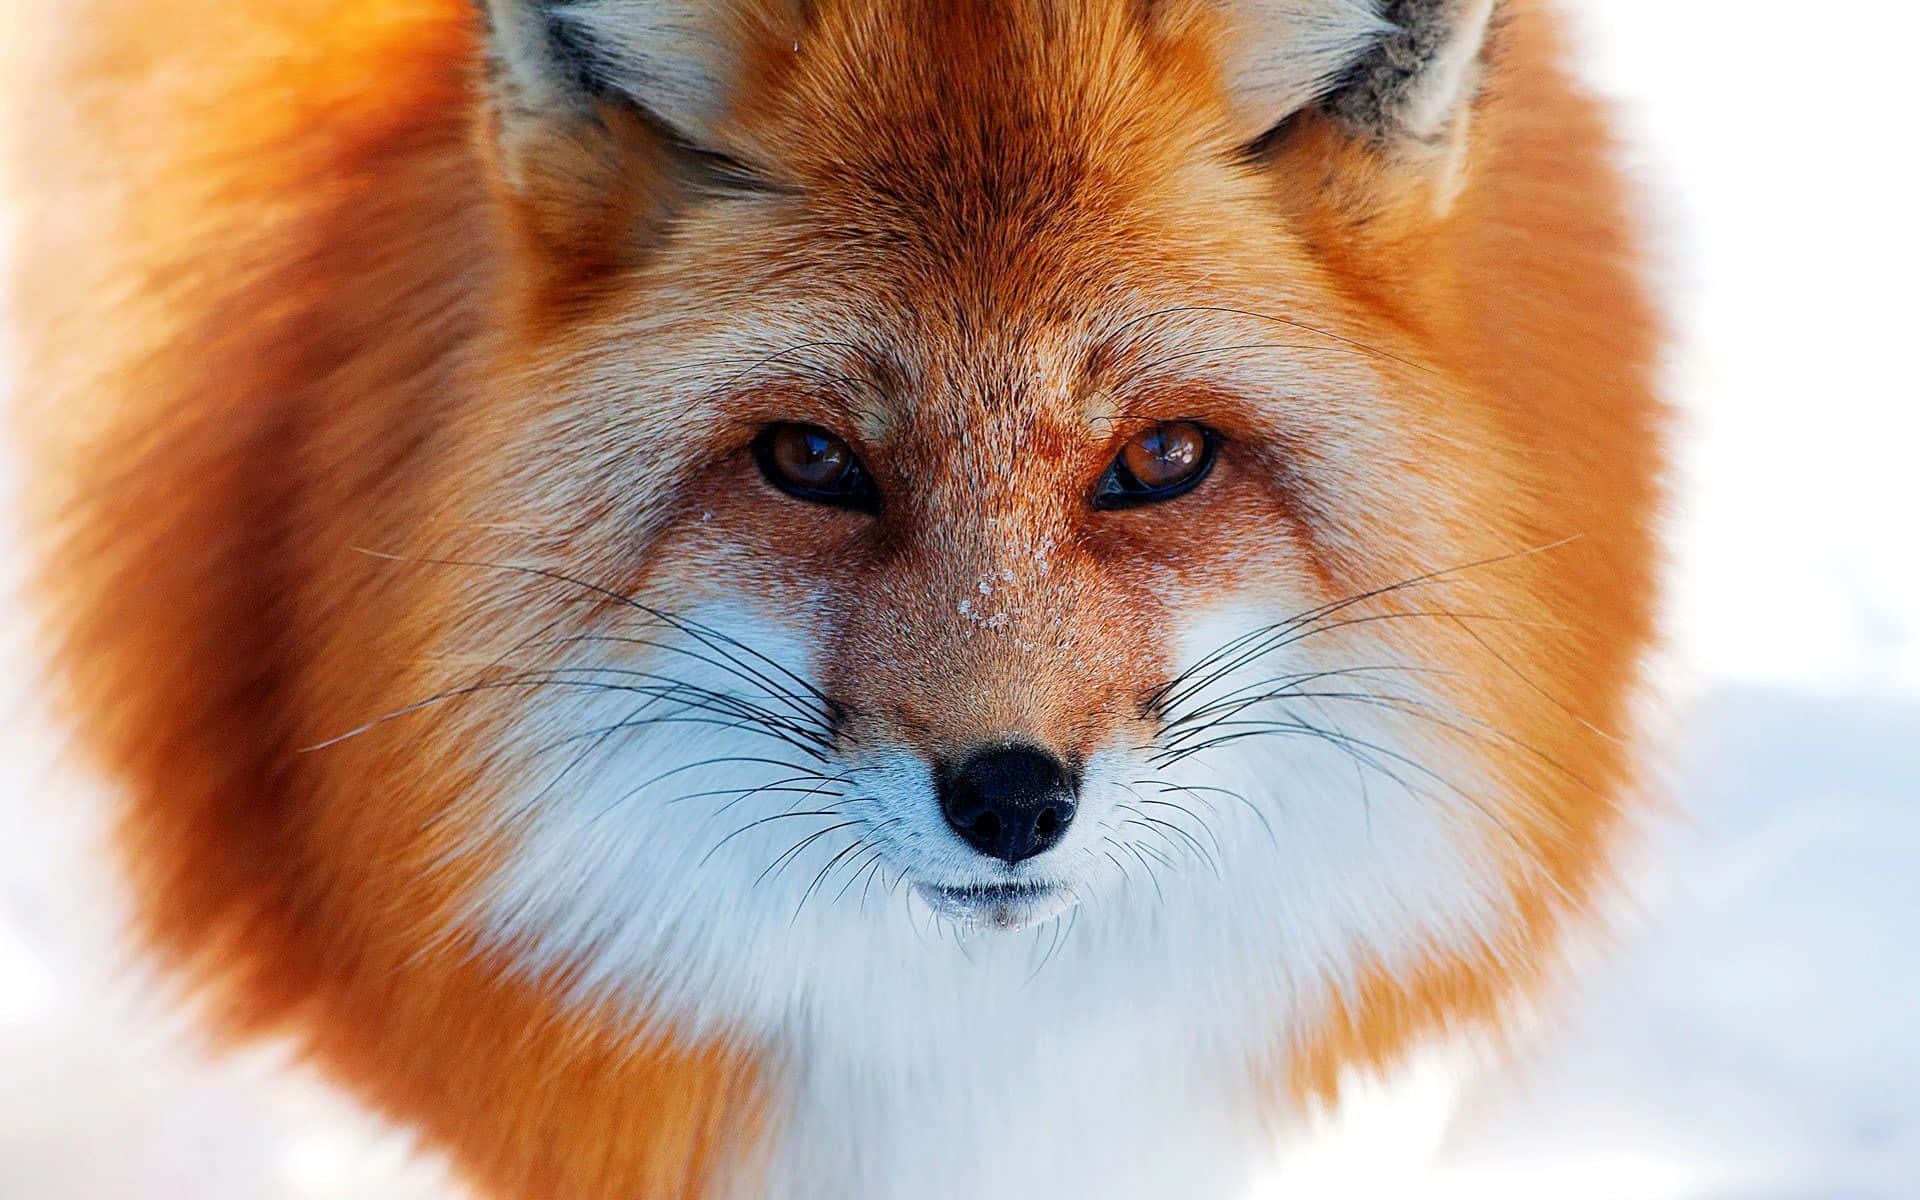 Look How Adorable This Little Fox Is